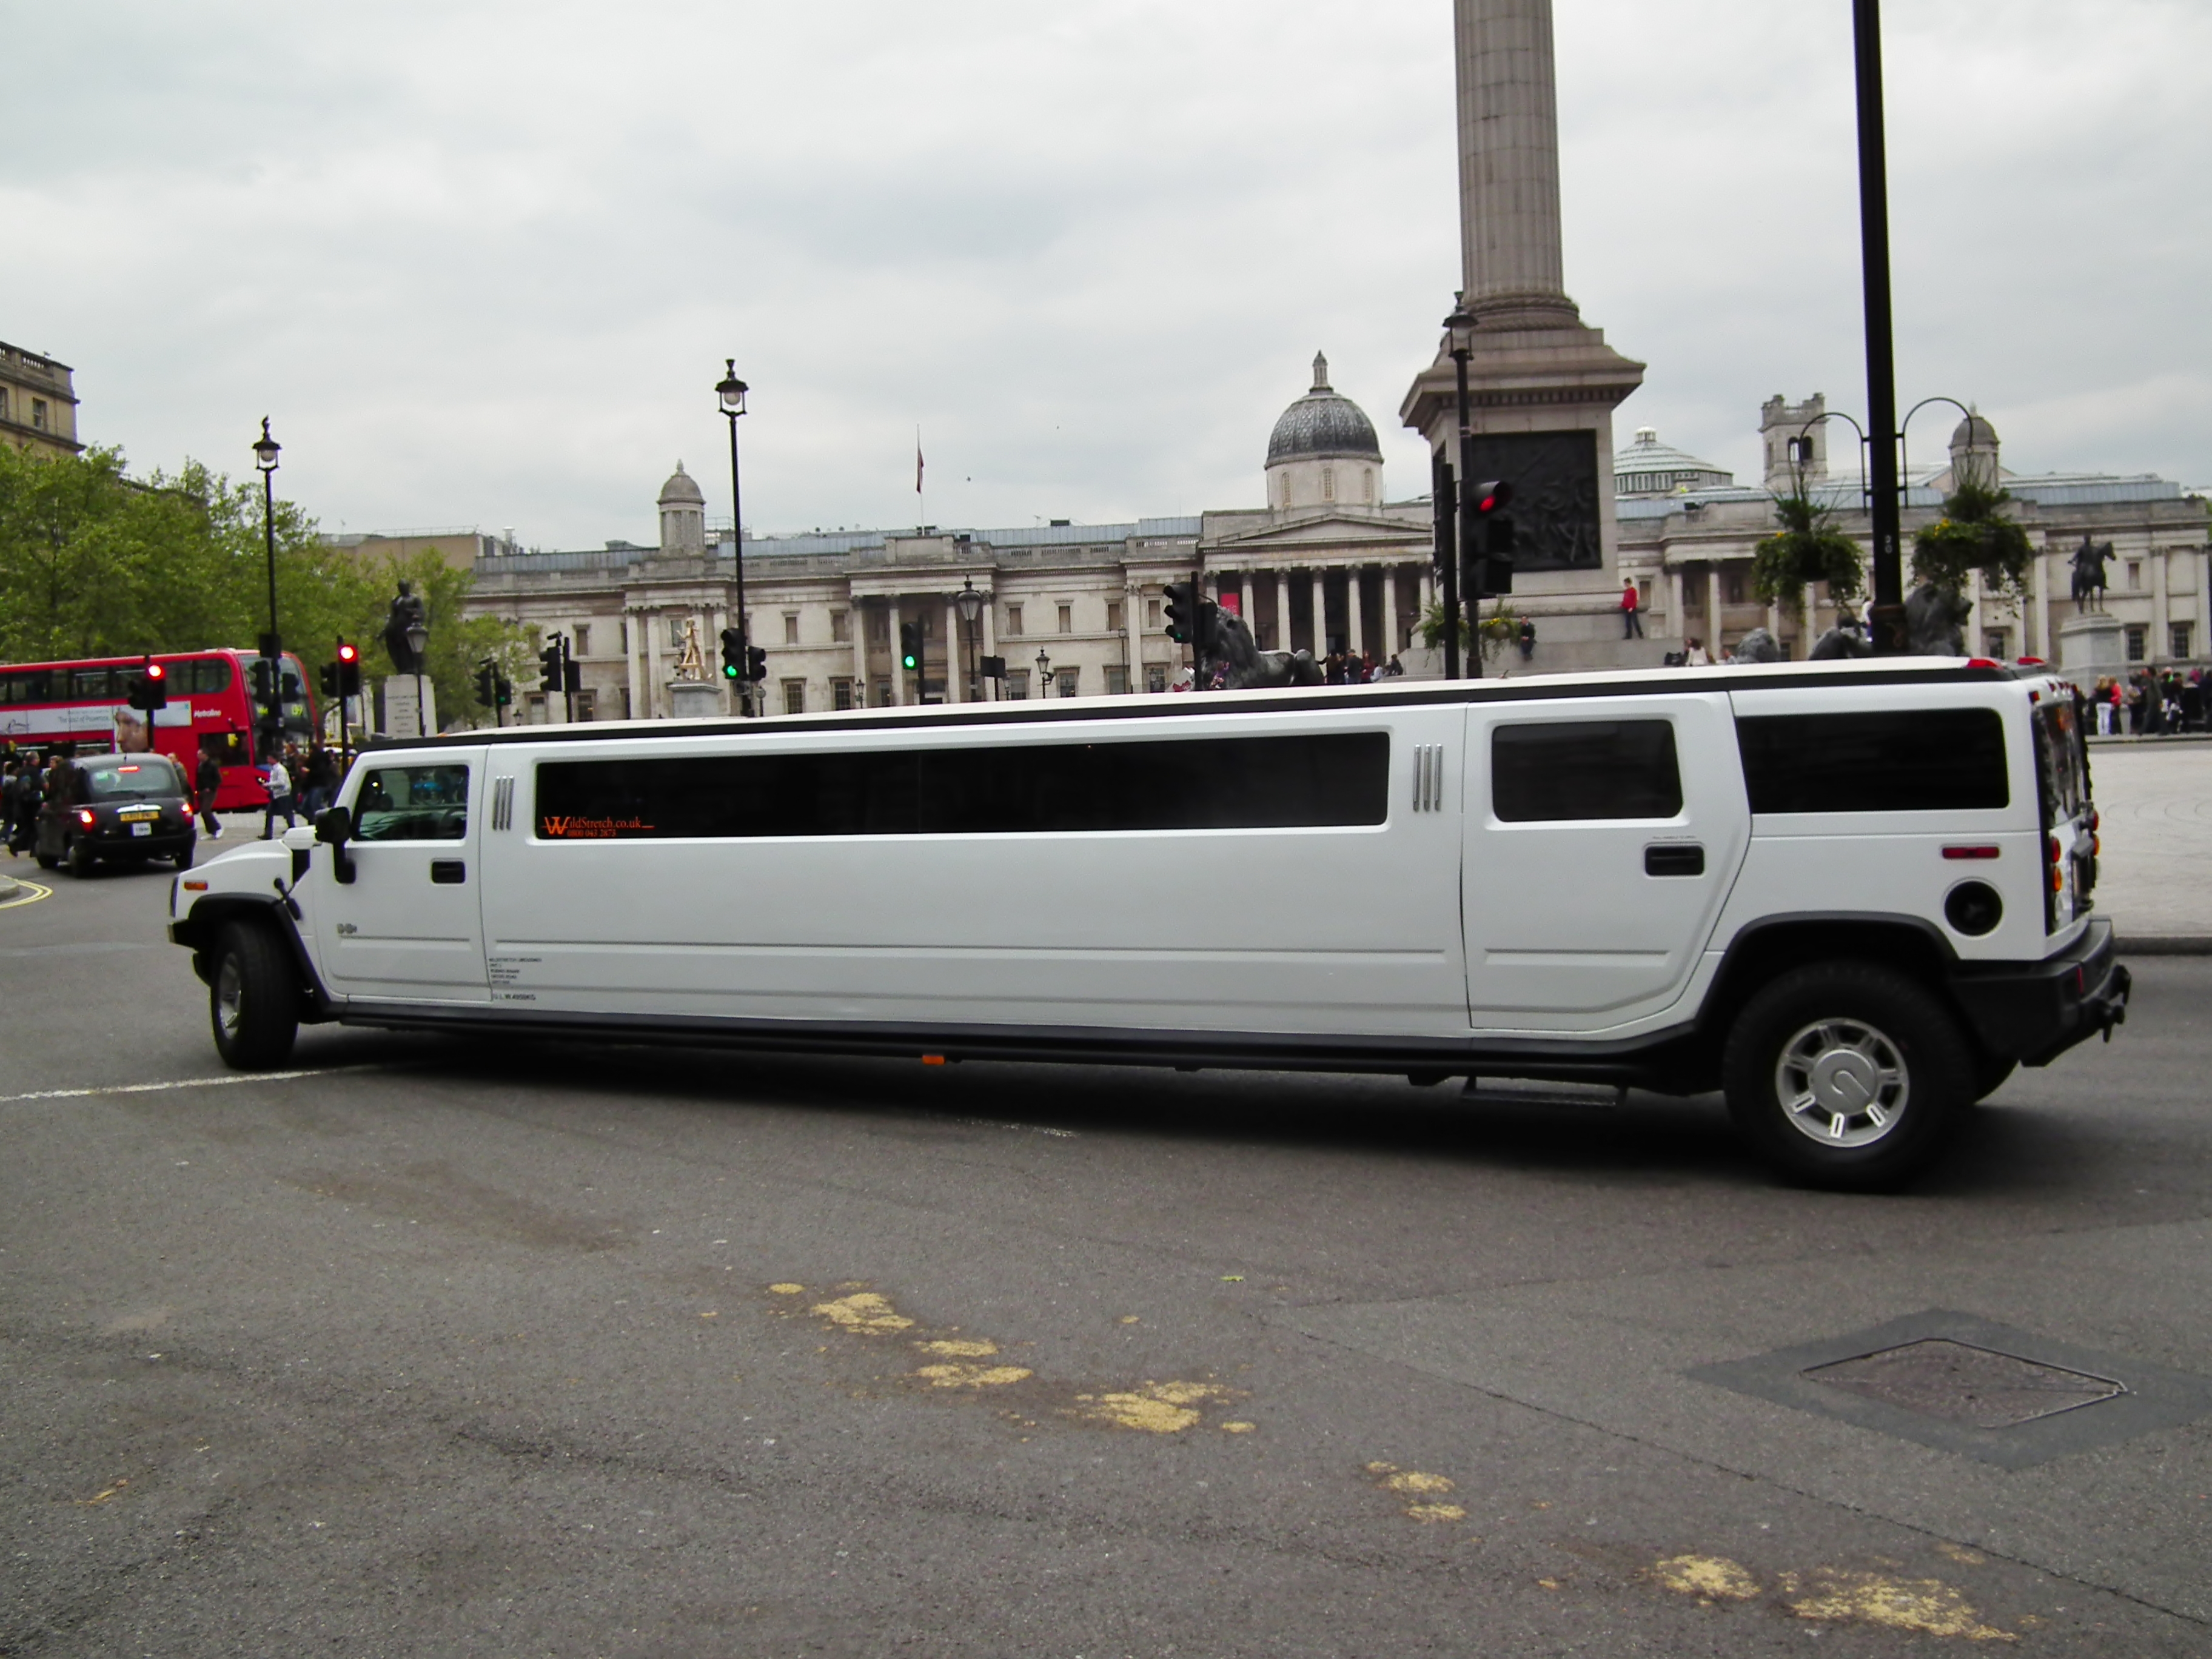 Hummer H2 WildStretch Limo | Flickr - Photo Sharing!